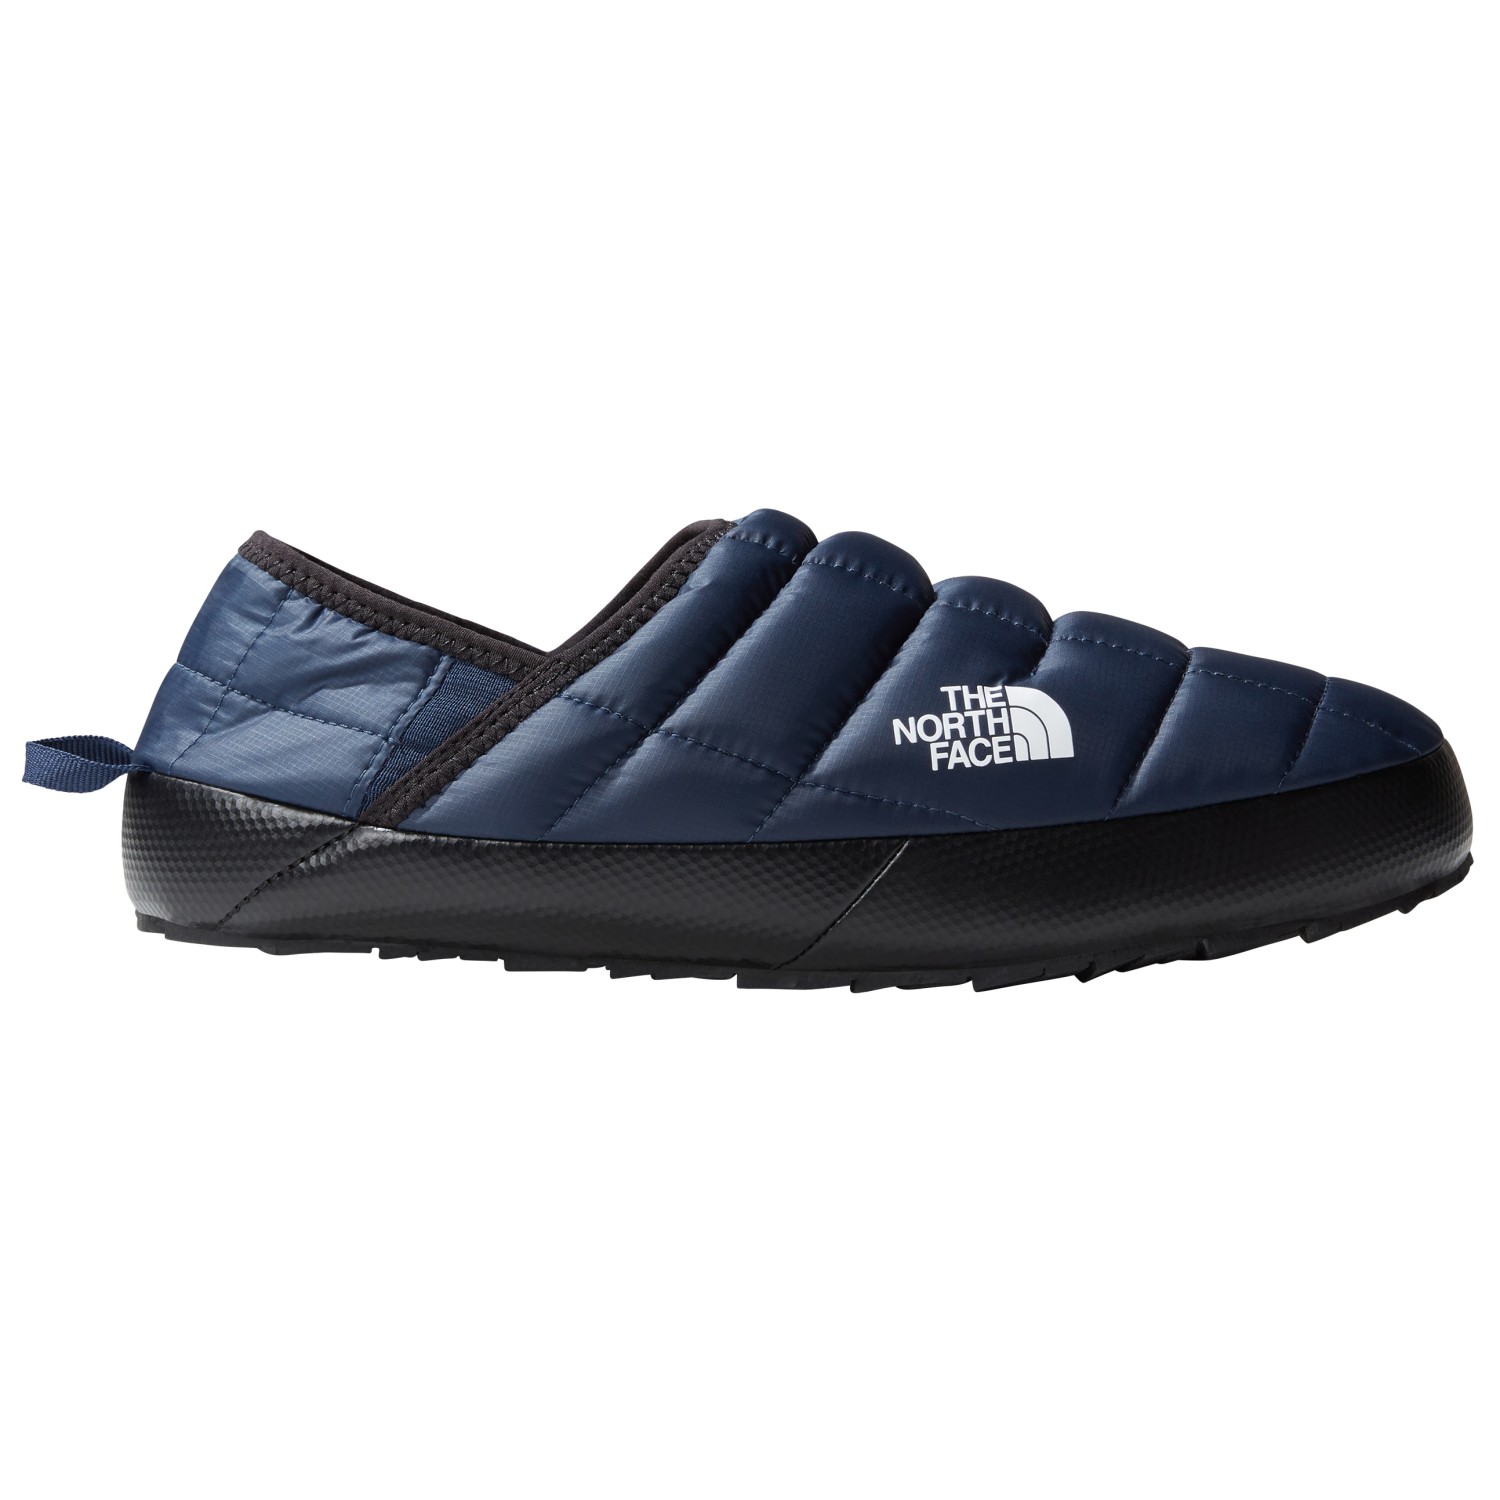 Домашние тапочки The North Face Thermoball Traction Mule V, цвет Summit Navy/TNF White шорты the north face women s aphrodite motion capri цвет summit navy